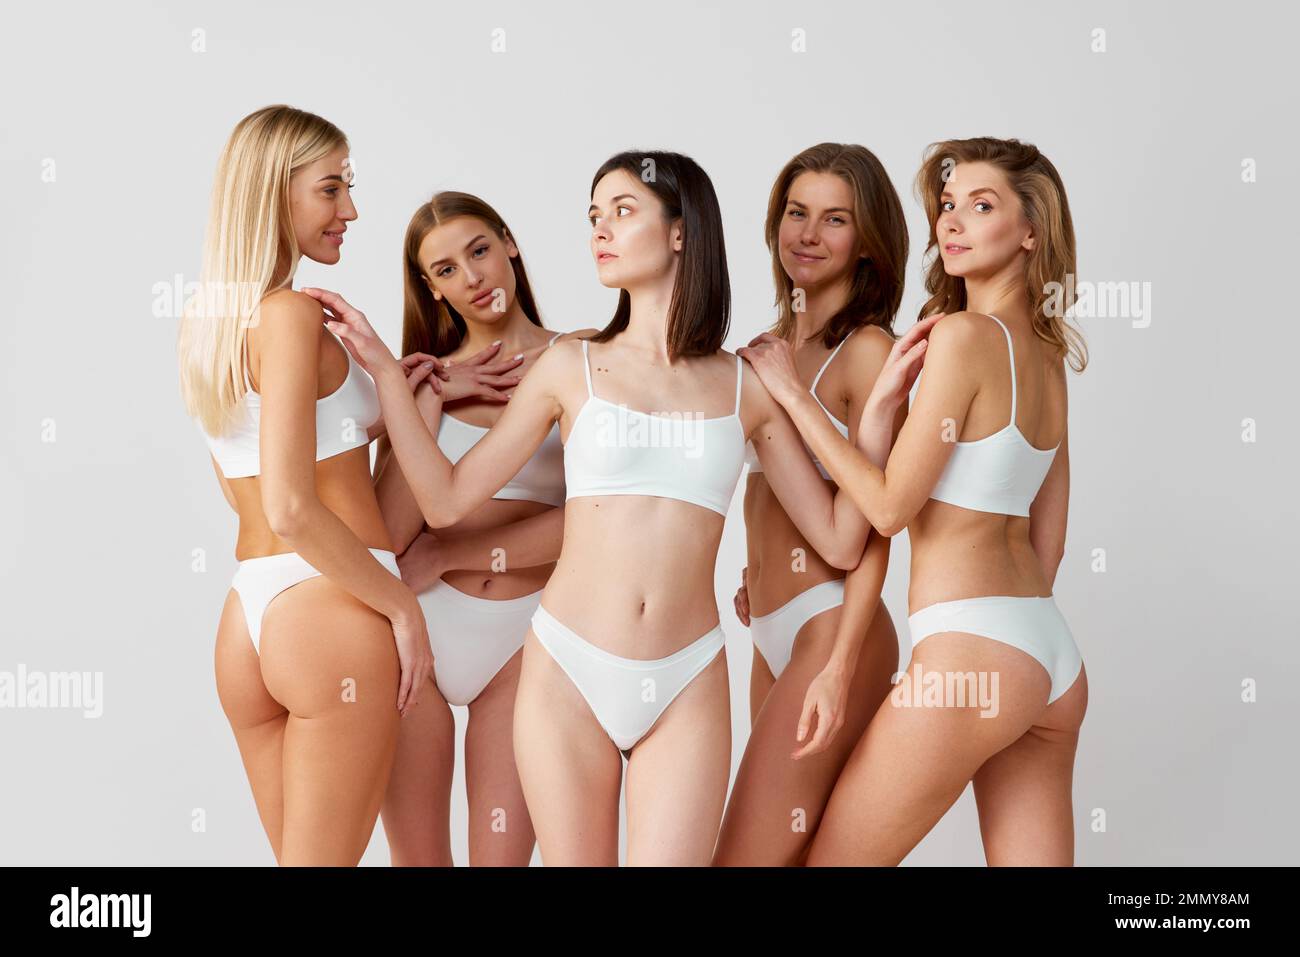 Support of friends. Protection of women. Group portrait of beautiful young women posing in underwear over grey studio background. Concept of natural Stock Photo